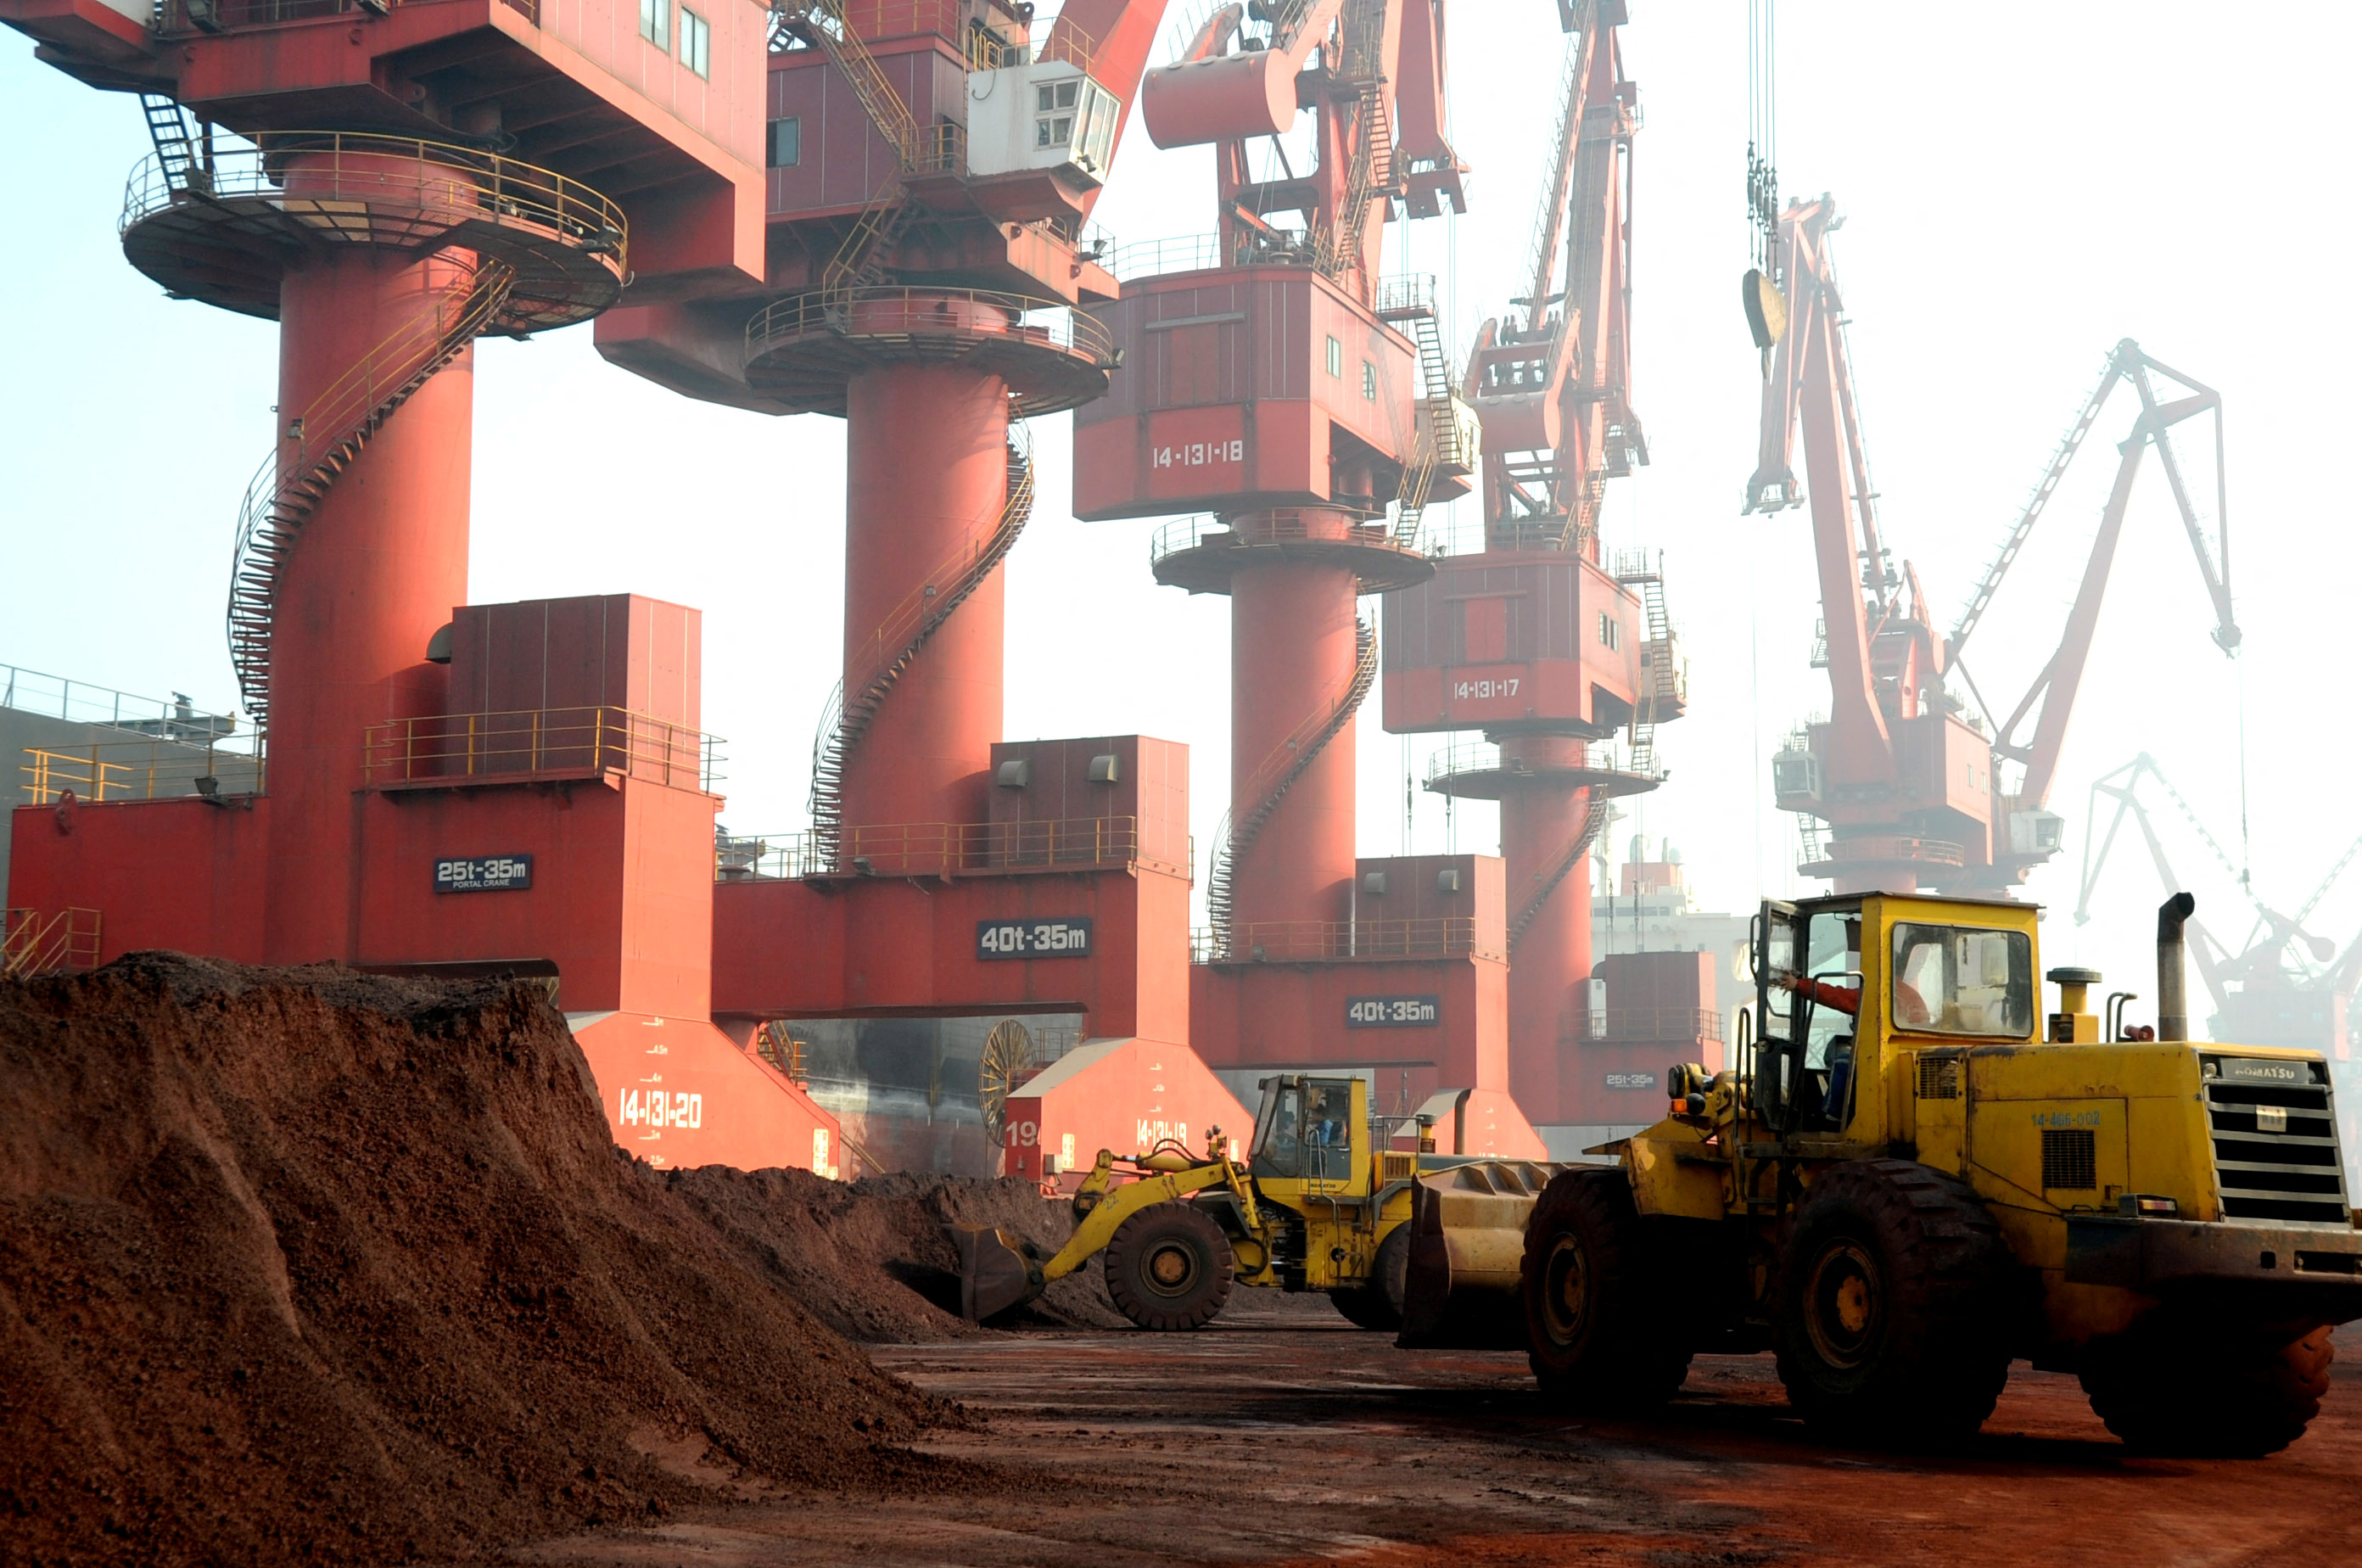 Workers transport soil containing rare earth elements for export at a port in Lianyungang